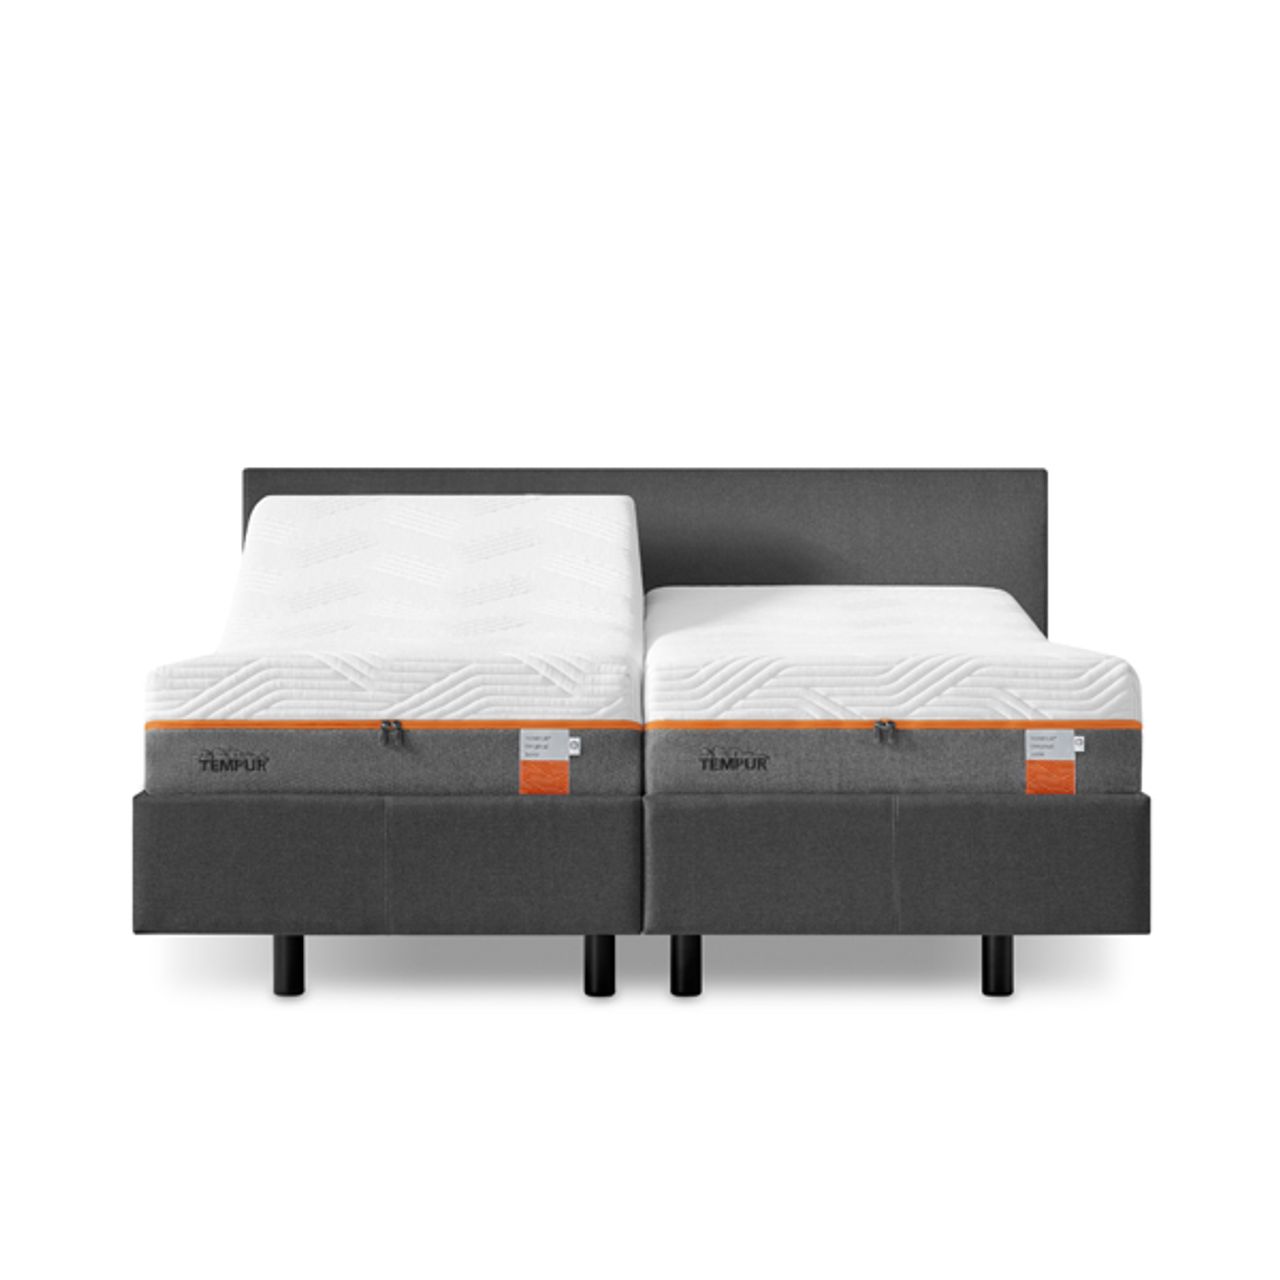 TEMPUR Adjustable Bed Collection